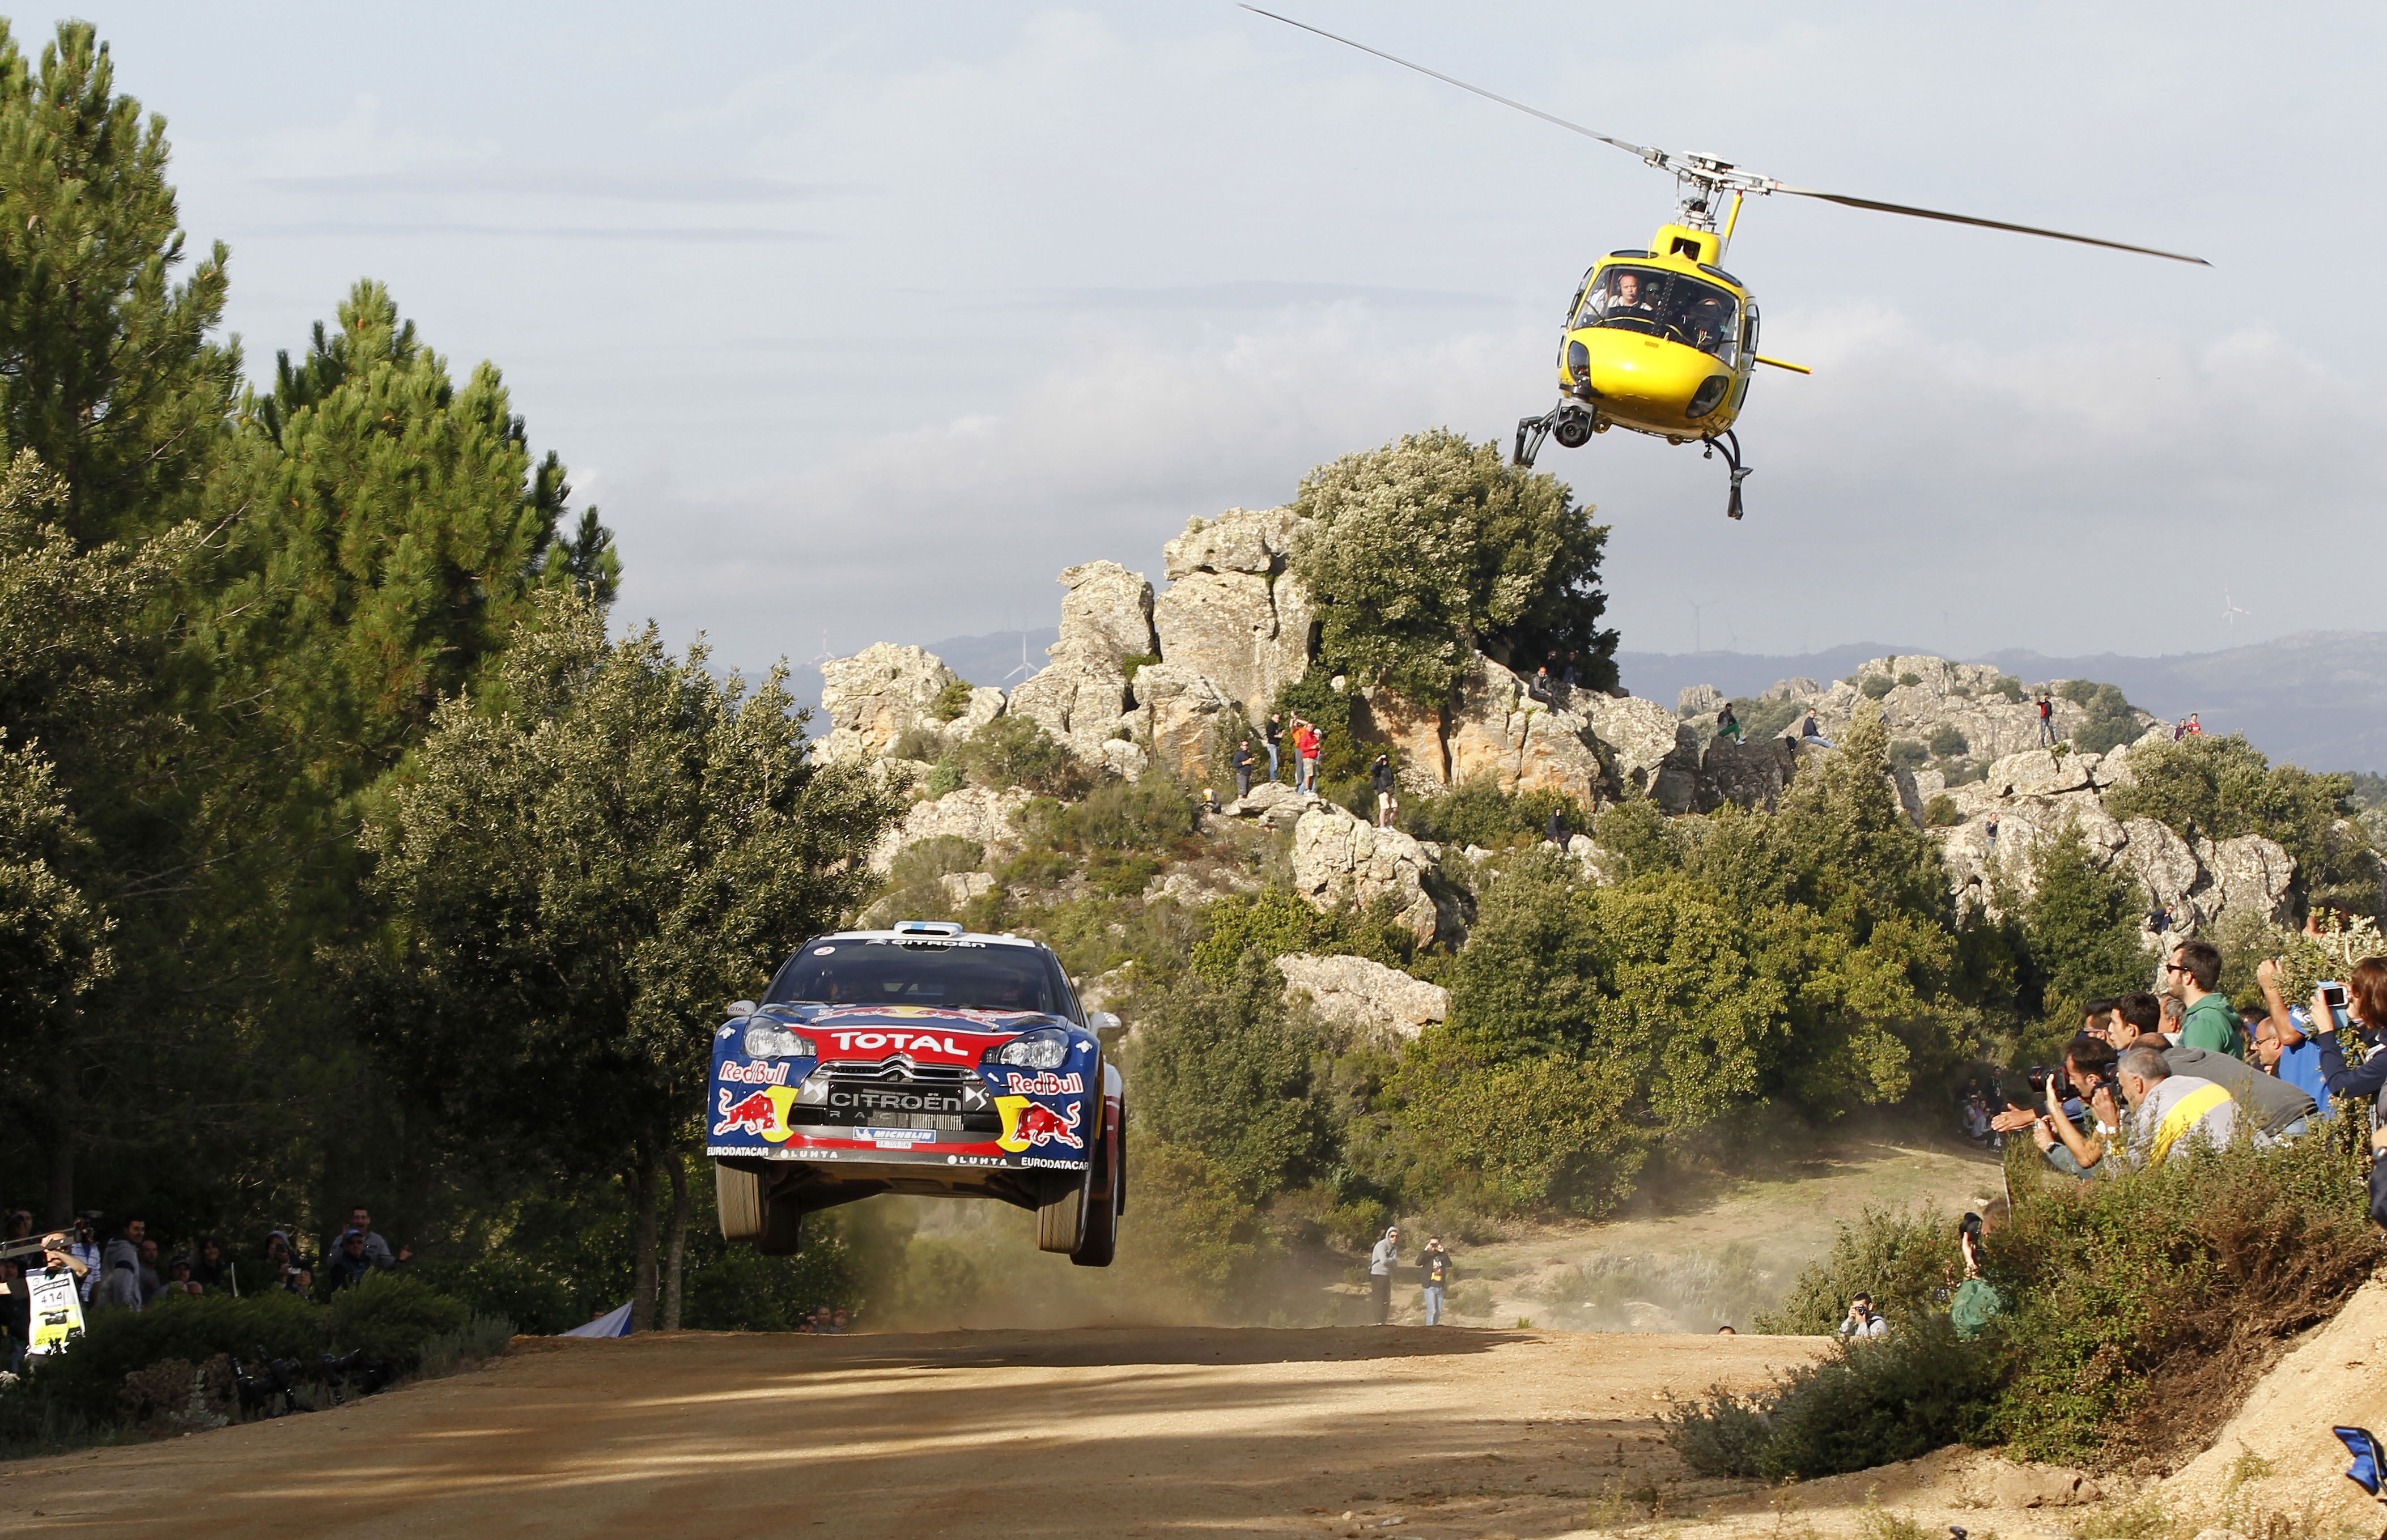 A helicopter chases a sports car at a rally